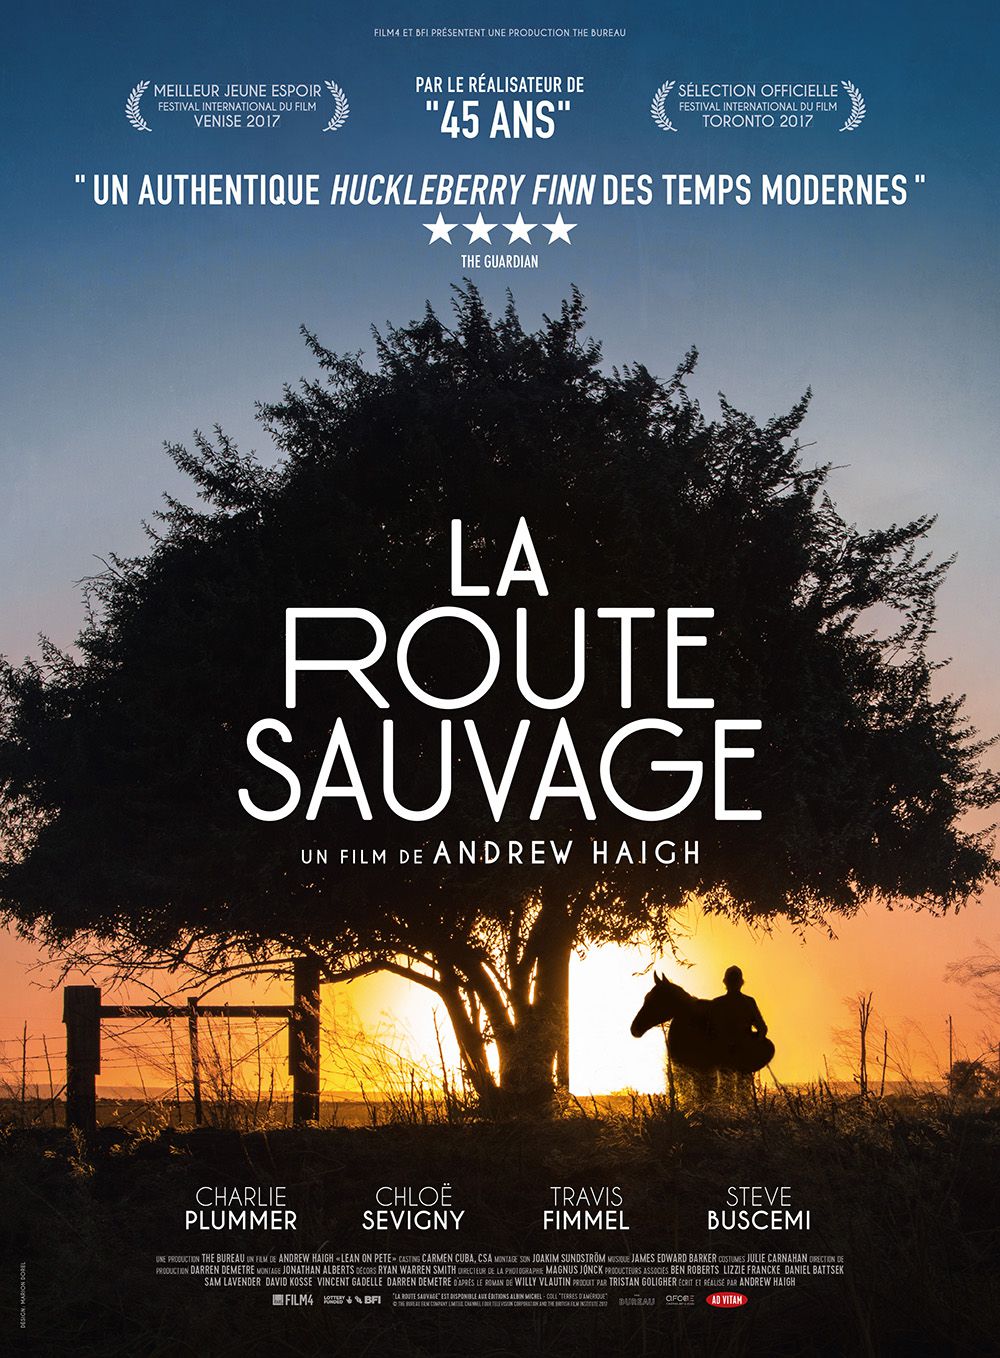 La Route sauvage - Film (2018) streaming VF gratuit complet